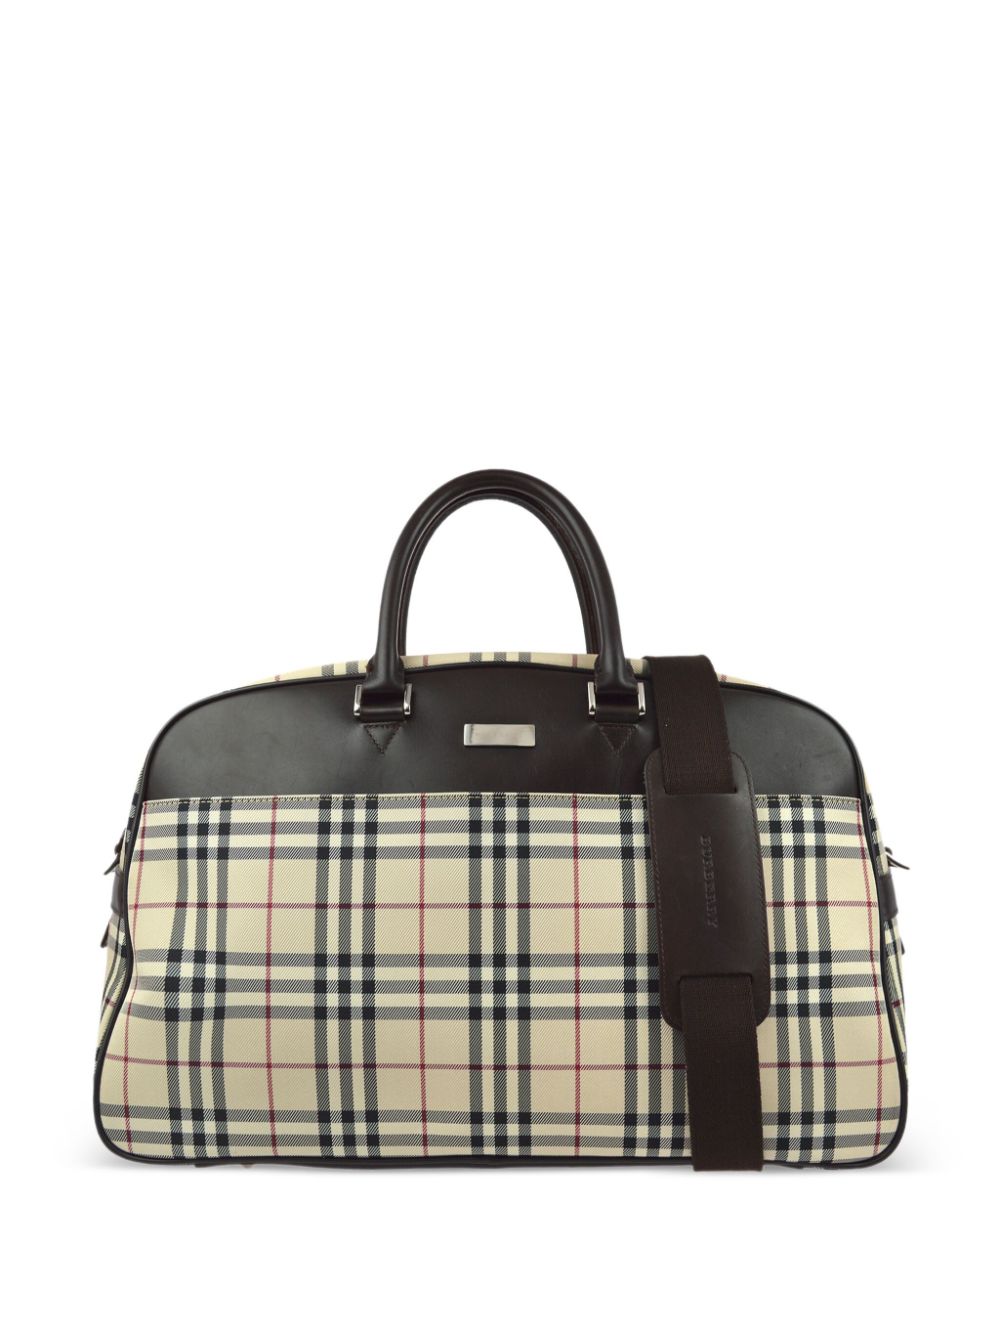 1990-2000s checked two-way duffle bag